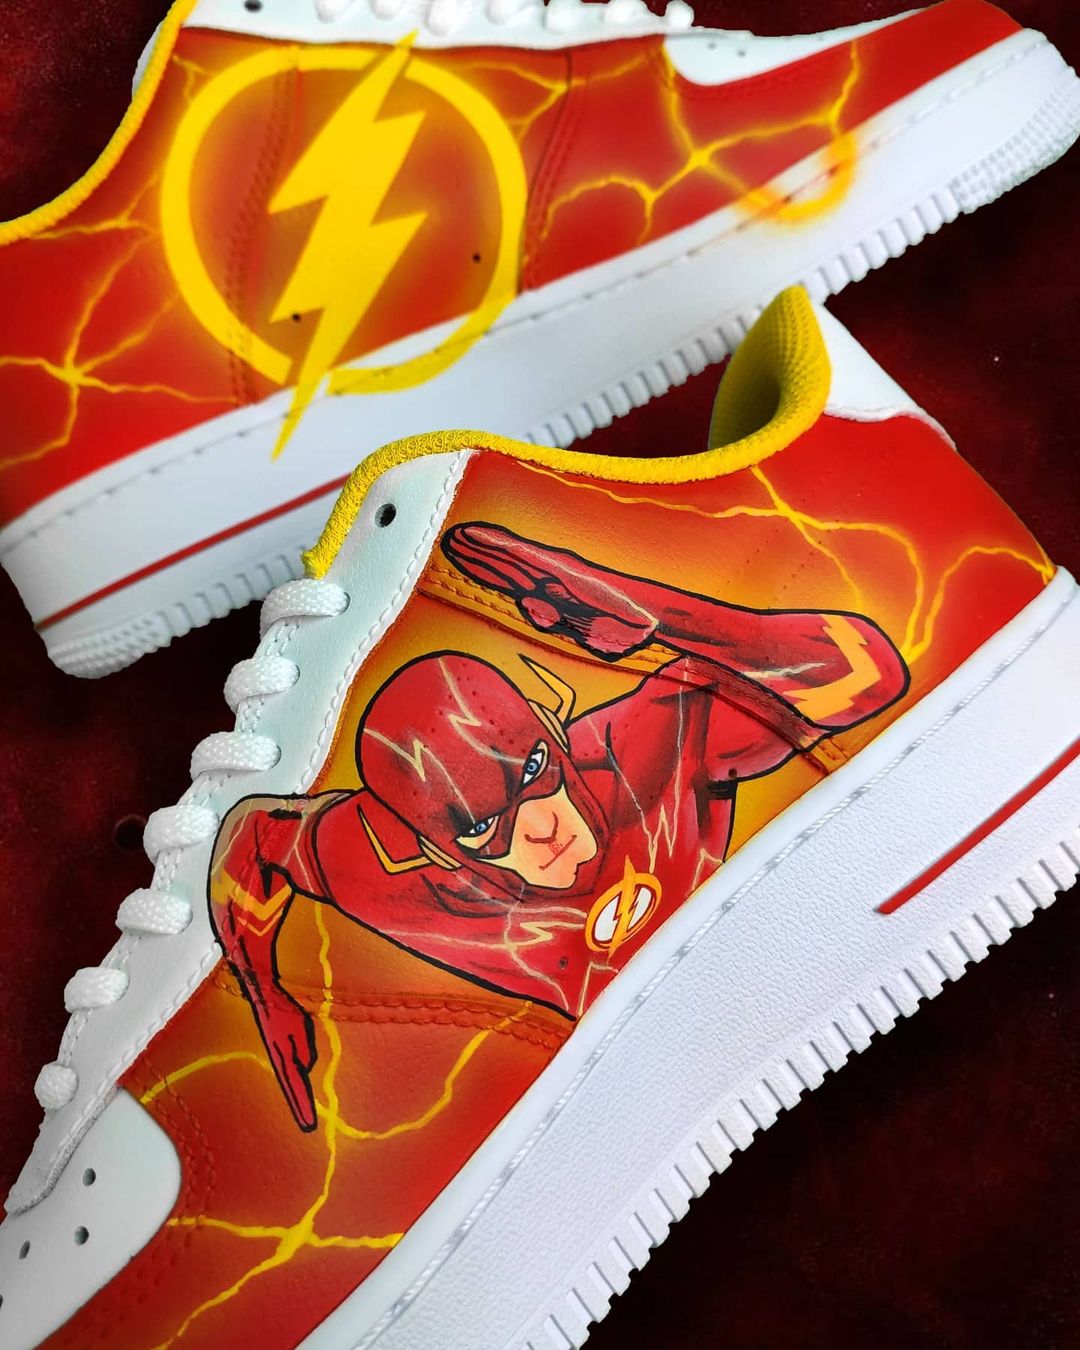 the flash air force 1